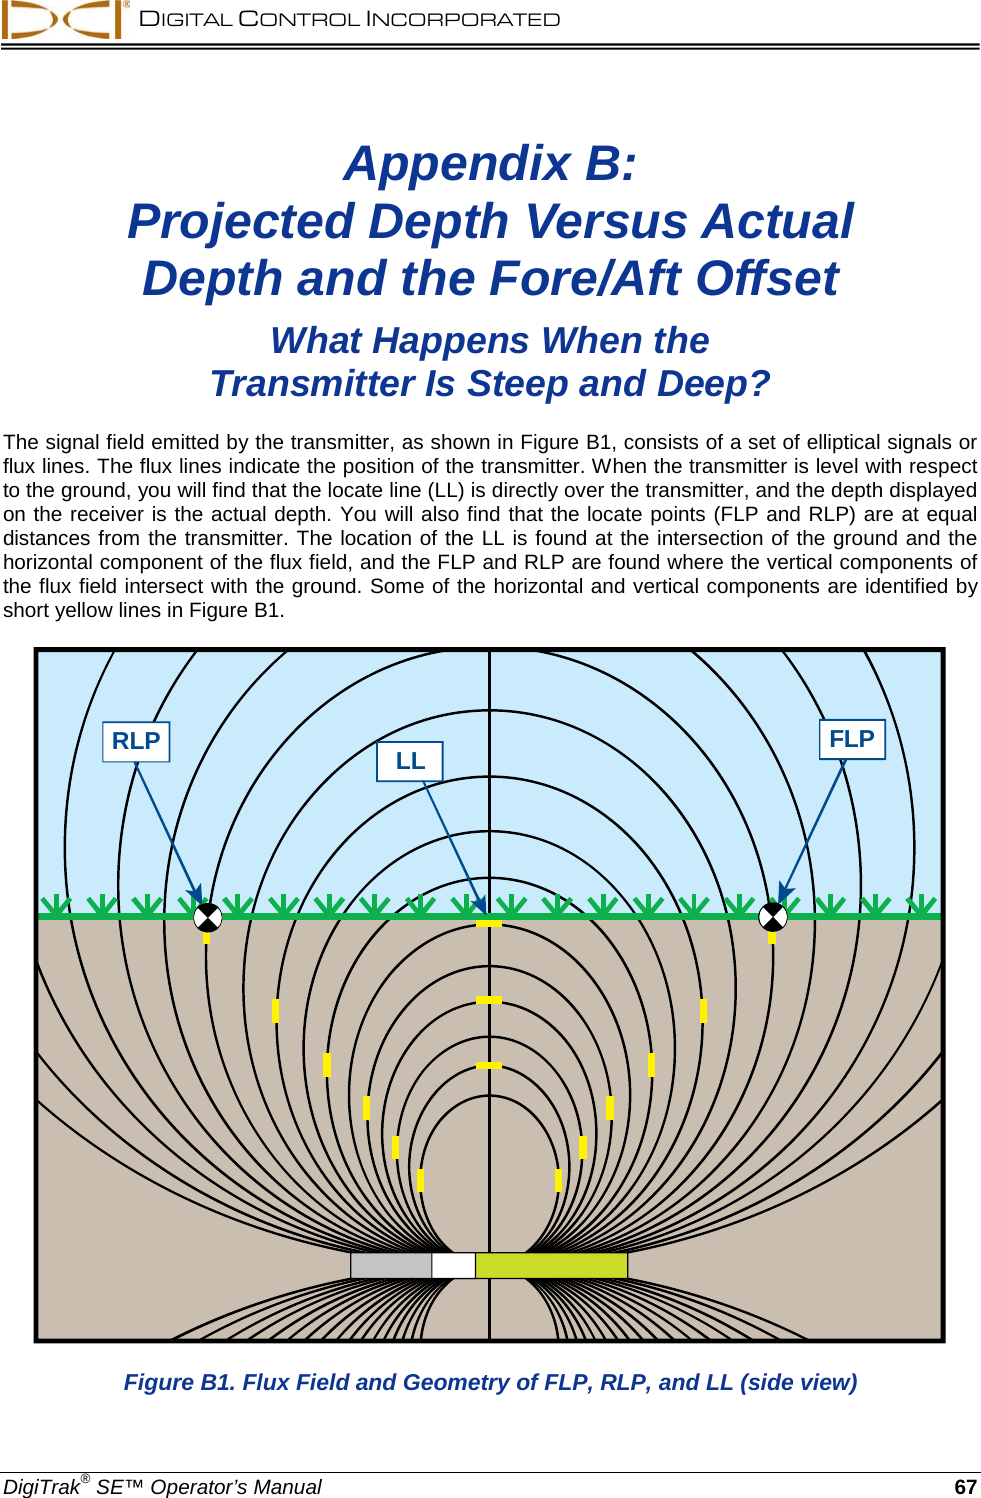  DIGITAL CONTROL INCORPORATED  DigiTrak® SE™ Operator’s Manual 67 Appendix B: Projected Depth Versus Actual Depth and the Fore/Aft Offset  What Happens When the  Transmitter Is Steep and Deep? The signal field emitted by the transmitter, as shown in Figure B1, consists of a set of elliptical signals or flux lines. The flux lines indicate the position of the transmitter. When the transmitter is level with respect to the ground, you will find that the locate line (LL) is directly over the transmitter, and the depth displayed on the receiver is the actual depth. You will also find that the locate points (FLP and RLP) are at equal distances from the transmitter. The location of the LL is found at the intersection of the ground and the horizontal component of the flux field, and the FLP and RLP are found where the vertical components of the flux field intersect with the ground. Some of the horizontal and vertical components are identified by short yellow lines in Figure B1. RLP FLPLL Figure B1. Flux Field and Geometry of FLP, RLP, and LL (side view) 